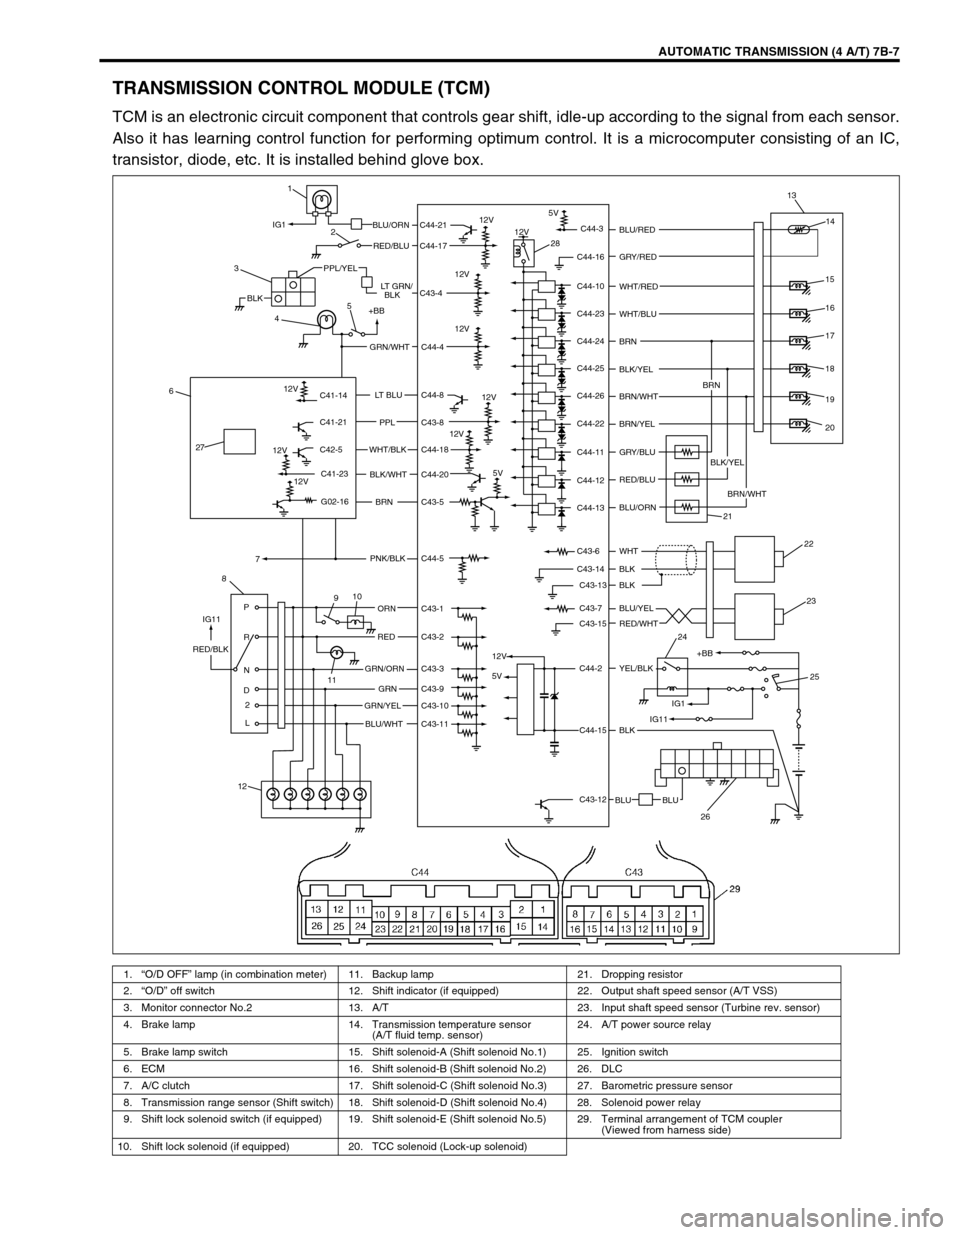 SUZUKI SWIFT 2000 1.G Transmission Service Workshop Manual AUTOMATIC TRANSMISSION (4 A/T) 7B-7
TRANSMISSION CONTROL MODULE (TCM)
TCM is an electronic circuit component that controls gear shift, idle-up according to the signal from each sensor.
Also it has lea